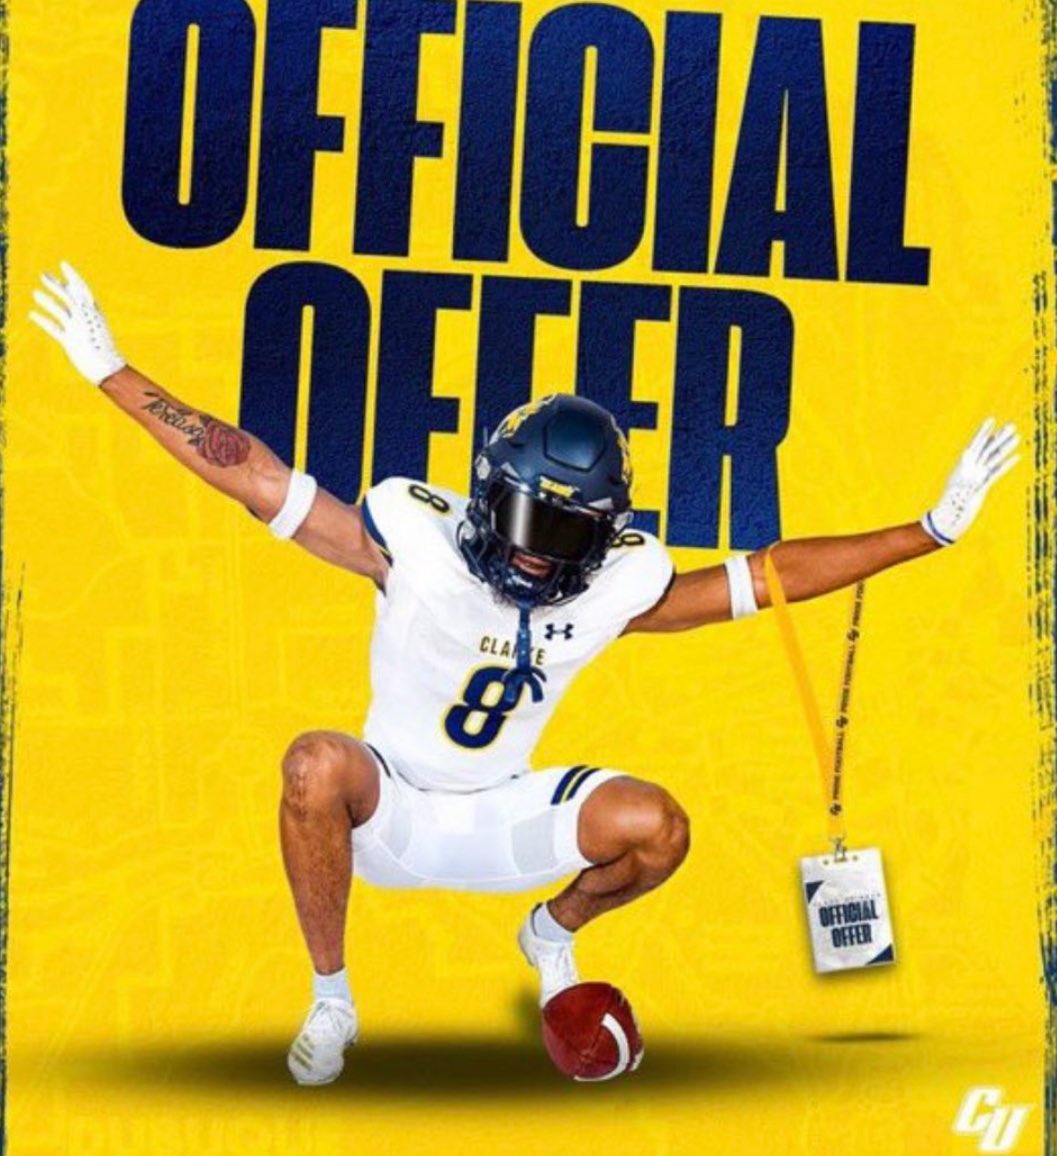 After a great conversation with @DurrellMitchel1 I am blessed to receive my 2nd offer from the university of Clarke!!! 🔵🟡 @Coach_Wiggers @TBHS_Football @TBHSTrojans @TBHSFballBoostr @GSV_STL @PrepRedzoneMO #AGTG